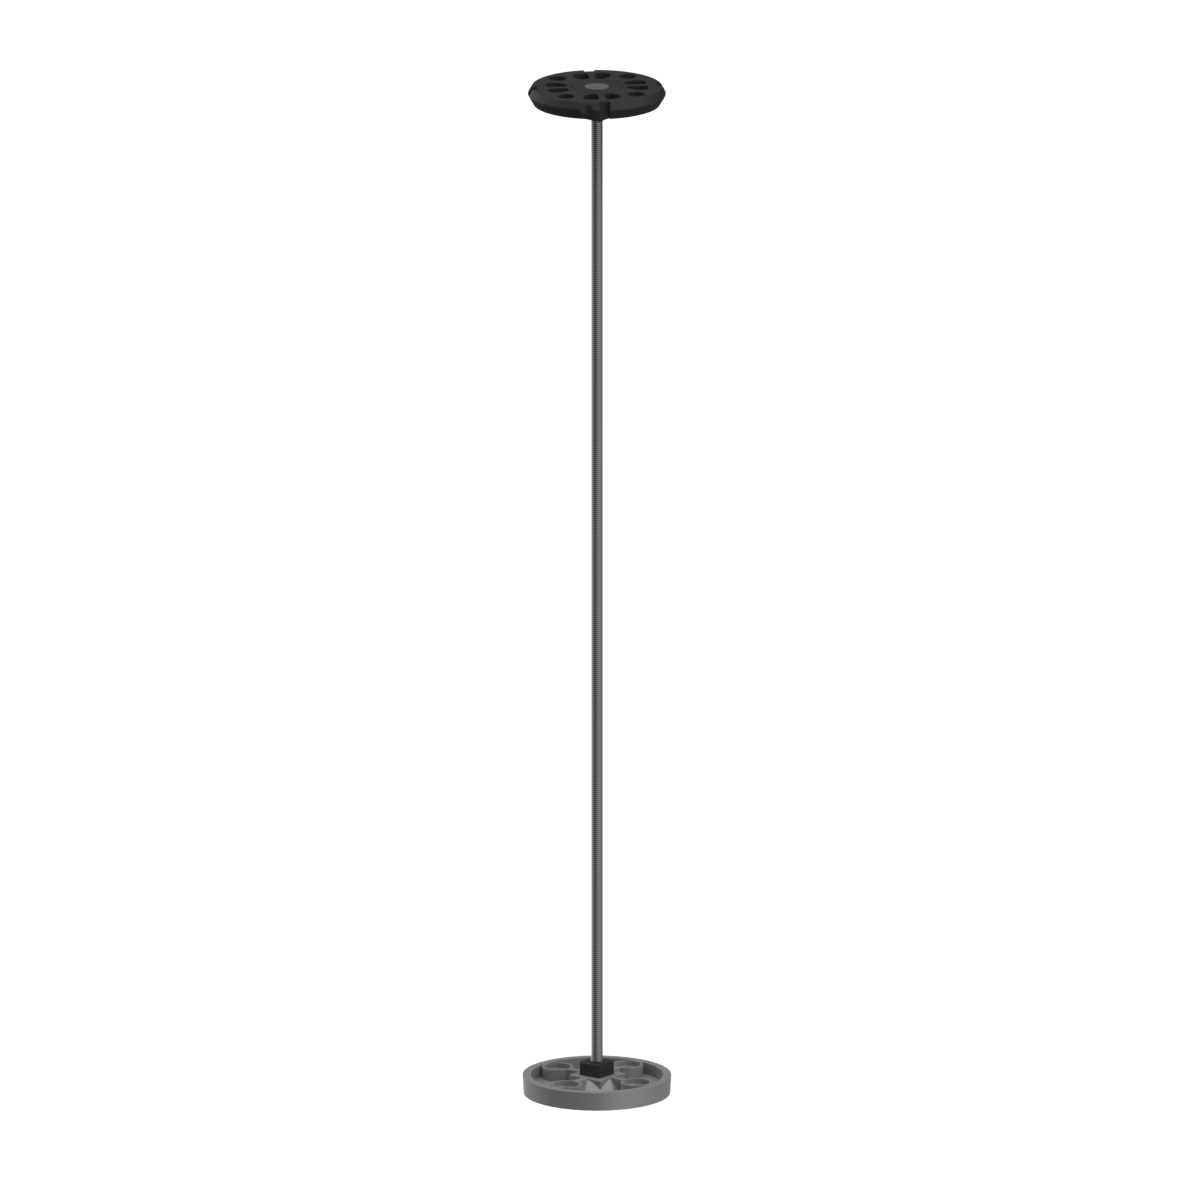 Nylon Care Ceiling support, for suspended ceiling, L = 500 mm, Dark grey